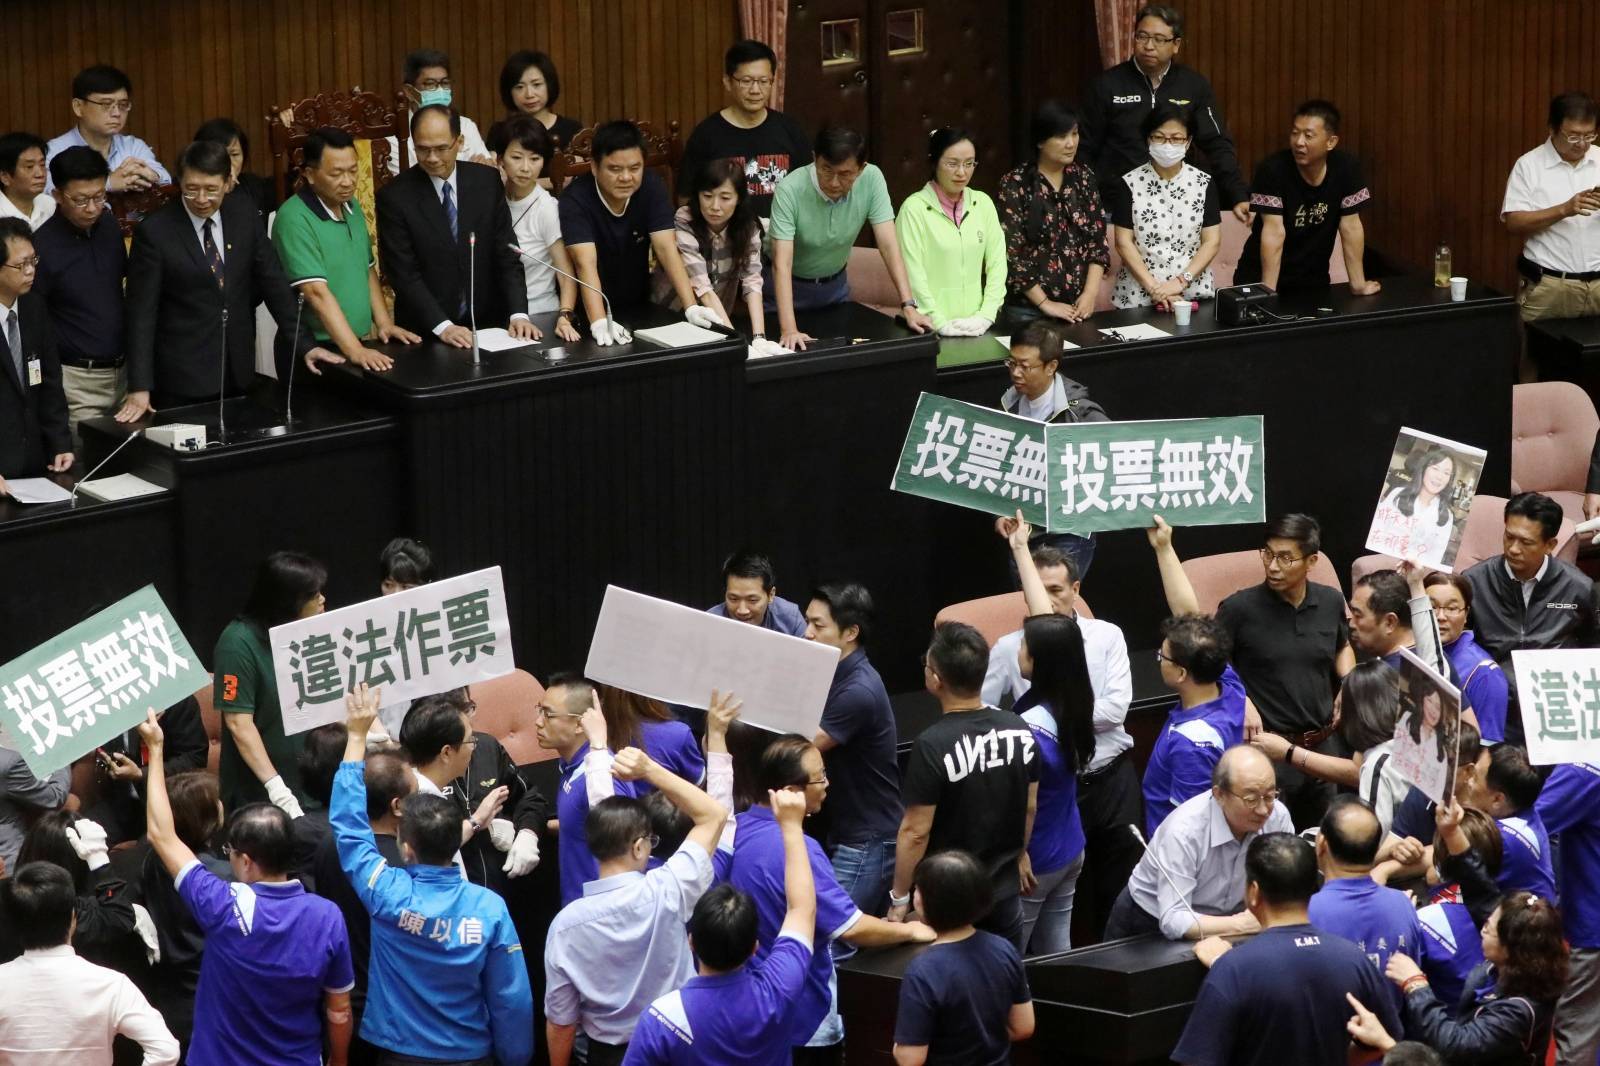 Lawmakers from Taiwan's ruling Democratic Progressive Party (DPP) argue with lawmakers from the main opposition Kuomintang (KMT) party, inside the parliament in Taipei